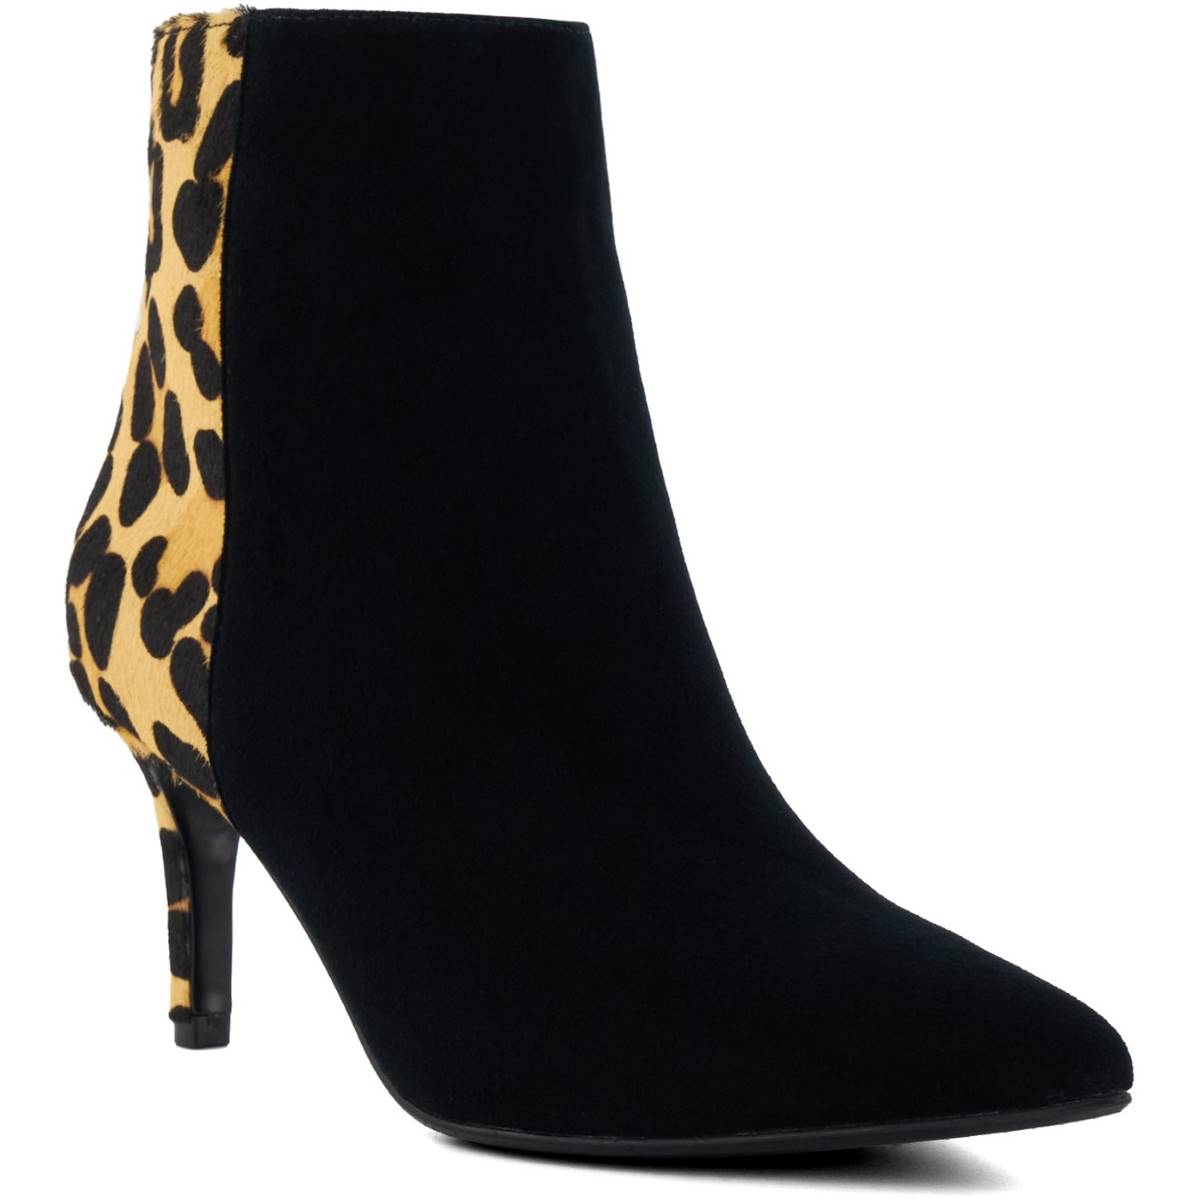 Dune London Obsessive 2 Leopard print Womens ankle boots 91500620004776 in a Leopard Leather in Size 5